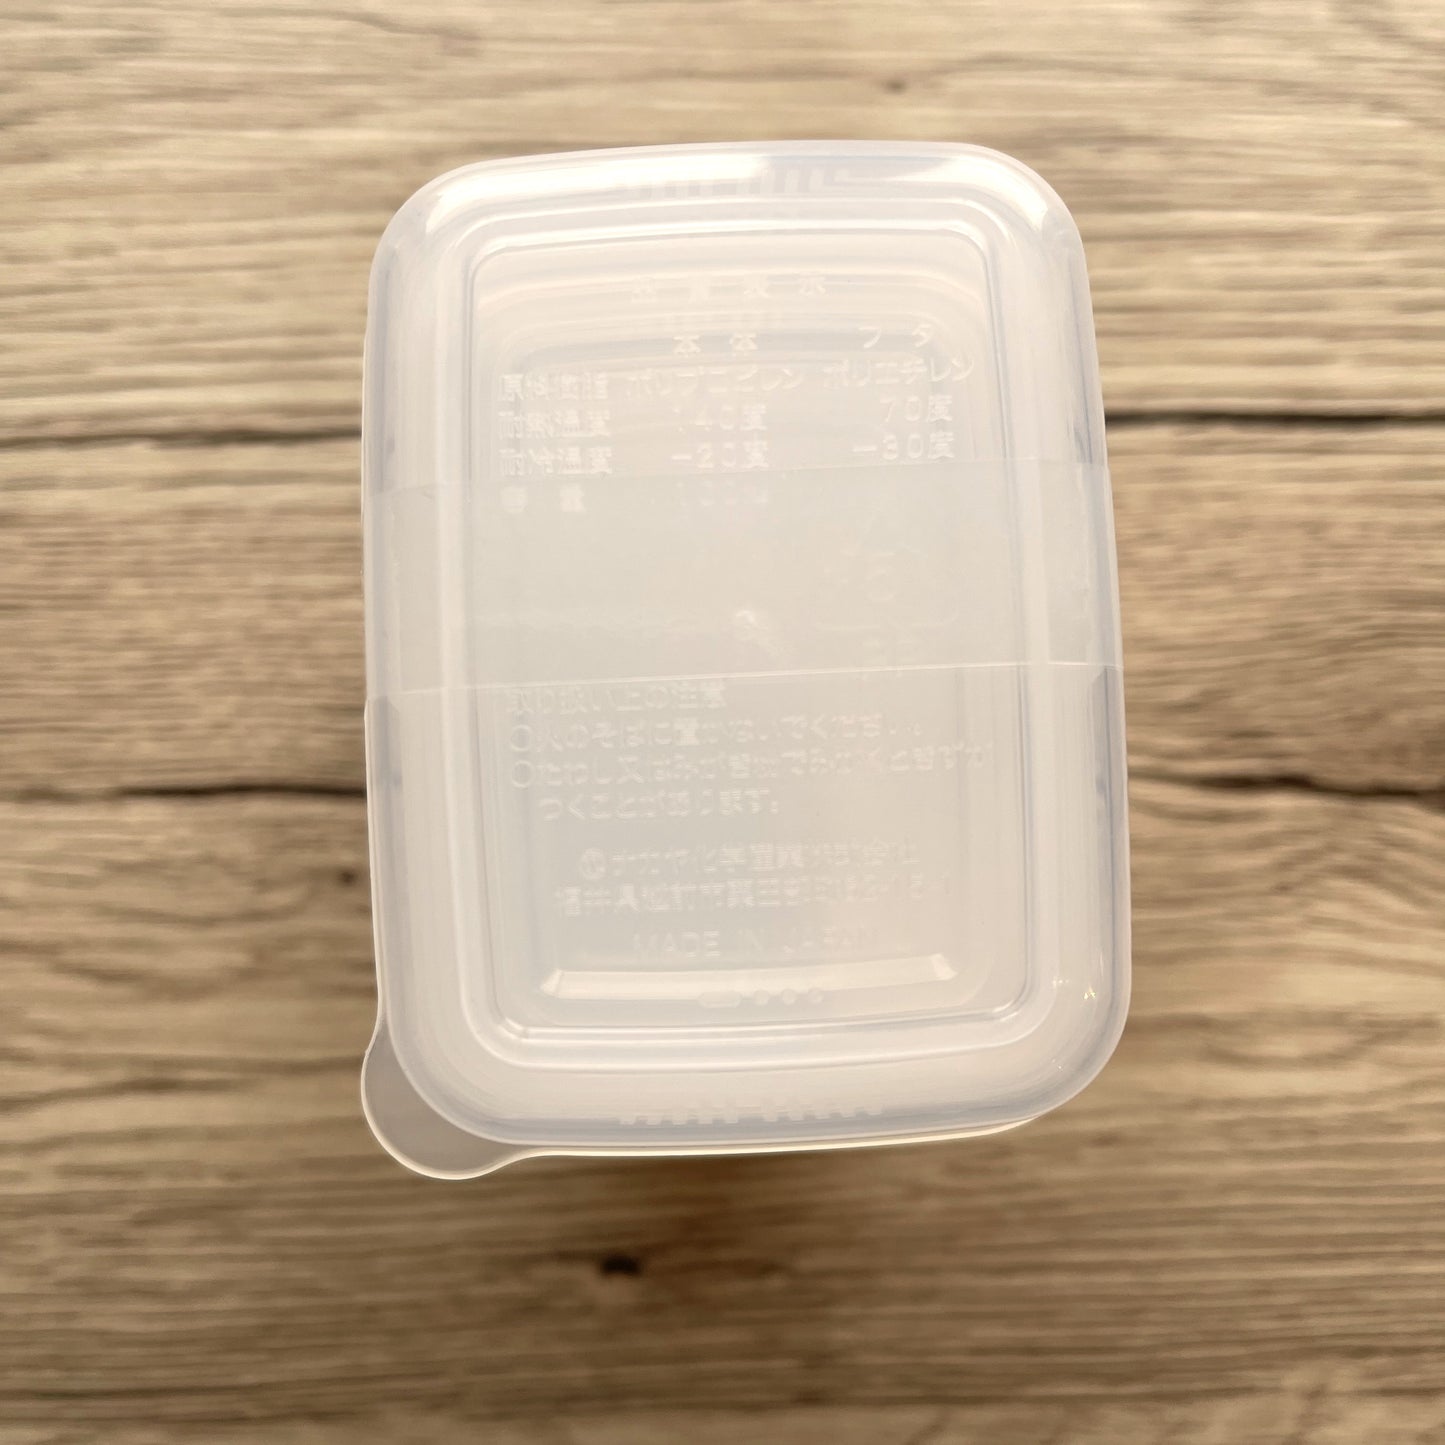 Storage Containers 100ml x 4 (Made in Japan)